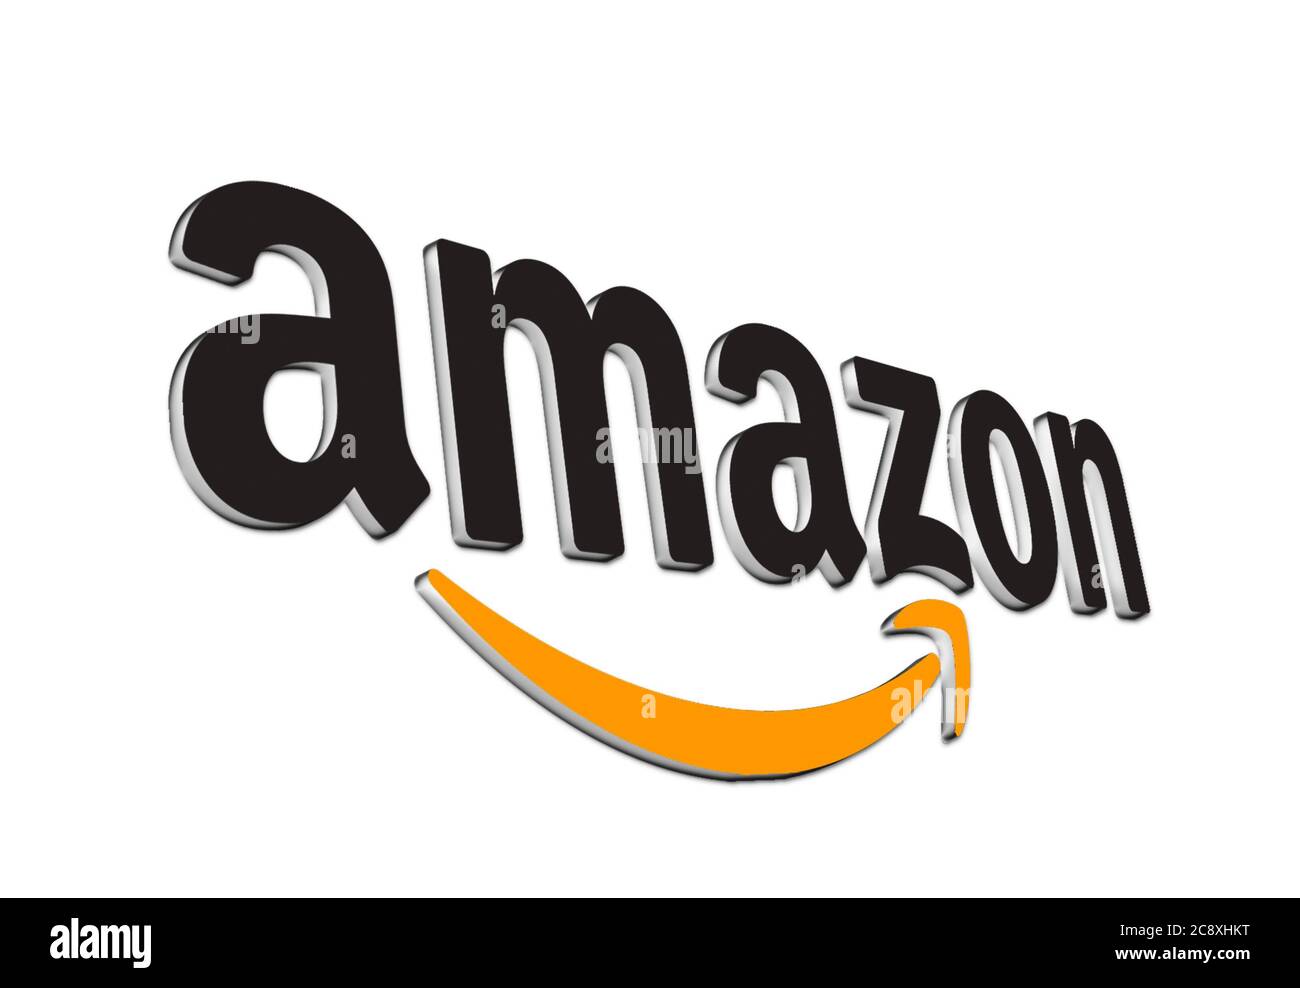 Amazon logo symbol Cut Out Stock Images & Pictures - Alamy